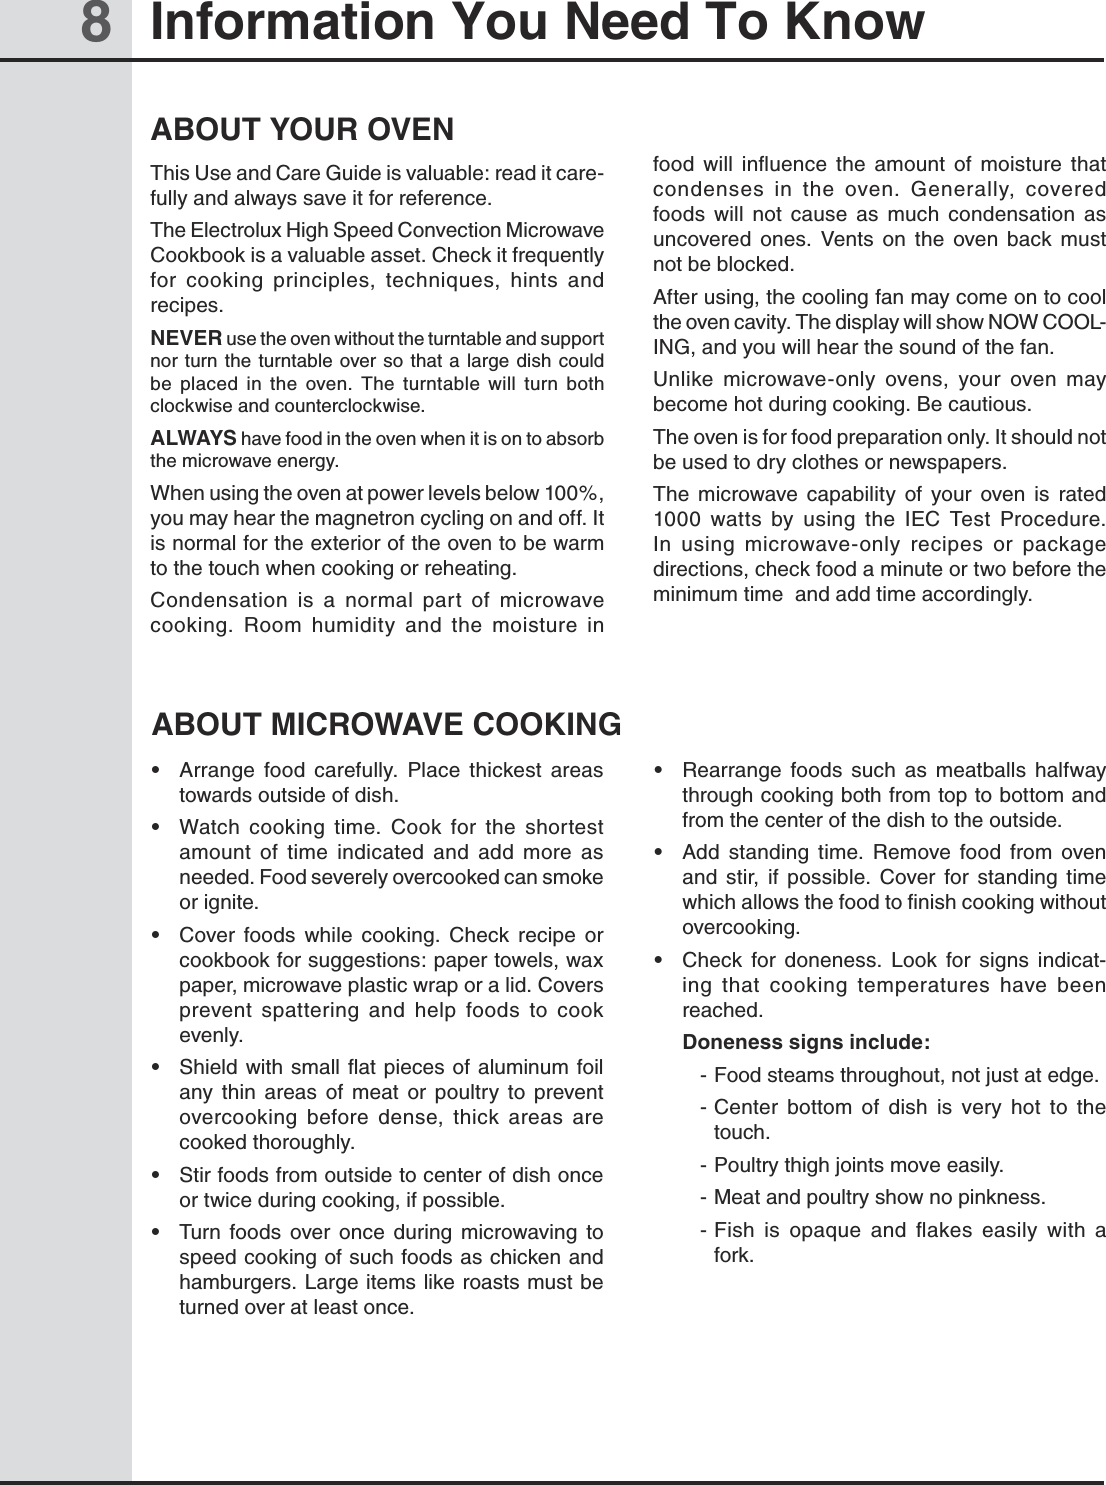 8Information You Need To KnowABOUT YOUR OVENThis Use and Care Guide is valuable: read it care-fully and always save it for reference.The Electrolux High Speed Convection Microwave Cookbook is a valuable asset. Check it frequently for  cooking  principles,  techniques,  hints  and recipes. NEVER use the oven without the turntable and support nor turn  the  turntable over so that a large dish could      be  placed  in  the  oven.  The  turntable  will  turn  both       clockwise and counterclockwise.ALWAYS have food in the oven when it is on to absorb the microwave energy.When using the oven at power levels below 100%, you may hear the magnetron cycling on and off. It is normal for the exterior of the oven to be warm to the touch when cooking or reheating.Condensation  is  a  normal  part  of  microwave cooking.  Room  humidity  and  the  moisture  in food  will  influence  the  amount  of  moisture  that condenses  in  the  oven.  Generally,  covered foods  will  not  cause  as  much  condensation  as uncovered  ones.  Vents  on  the  oven  back  must not be blocked.After using, the cooling fan may come on to cool the oven cavity. The display will show NOW COOL-ING, and you will hear the sound of the fan.Unlike  microwave-only  ovens,  your  oven  may become hot during cooking. Be cautious.The oven is for food preparation only. It should not be used to dry clothes or newspapers.The  microwave  capability  of  your  oven  is  rated 1000  watts  by  using  the  IEC  Test  Procedure. In  using  microwave-only  recipes  or  package directions, check food a minute or two before the minimum time  and add time accordingly.ABOUT MICROWAVE COOKING•  Arrange  food  carefully.  Place  thickest  areas towards outside of dish.•  Watch  cooking  time.  Cook  for  the  shortest amount  of  time  indicated  and  add  more  as needed. Food severely overcooked can smoke or ignite.•  Cover  foods  while  cooking.  Check  recipe  or cookbook for suggestions: paper towels, wax paper, microwave plastic wrap or a lid. Covers prevent  spattering  and  help  foods  to  cook evenly.•  Shield  with small flat pieces of aluminum  foil any  thin  areas  of  meat  or  poultry  to  prevent overcooking  before  dense,  thick  areas  are cooked thoroughly.•  Stir foods from outside to center of dish once or twice during cooking, if possible.•  Turn  foods  over  once  during  microwaving  to                speed cooking of such foods as chicken and hamburgers. Large items like roasts must be turned over at least once.•  Rearrange  foods  such  as  meatballs  halfway        through cooking both from top to bottom and from the center of the dish to the outside.•  Add  standing  time.  Remove  food  from  oven and  stir,  if  possible.  Cover  for  standing  time which allows the food to finish cooking without overcooking.•  Check  for  doneness.  Look  for  signs  indicat-ing  that  cooking  temperatures  have  been reached.   Doneness signs include:- Food steams throughout, not just at edge.- Center  bottom  of  dish  is  very  hot  to  the touch.- Poultry thigh joints move easily.- Meat and poultry show no pinkness.- Fish  is  opaque  and  ﬂakes  easily  with  a fork.